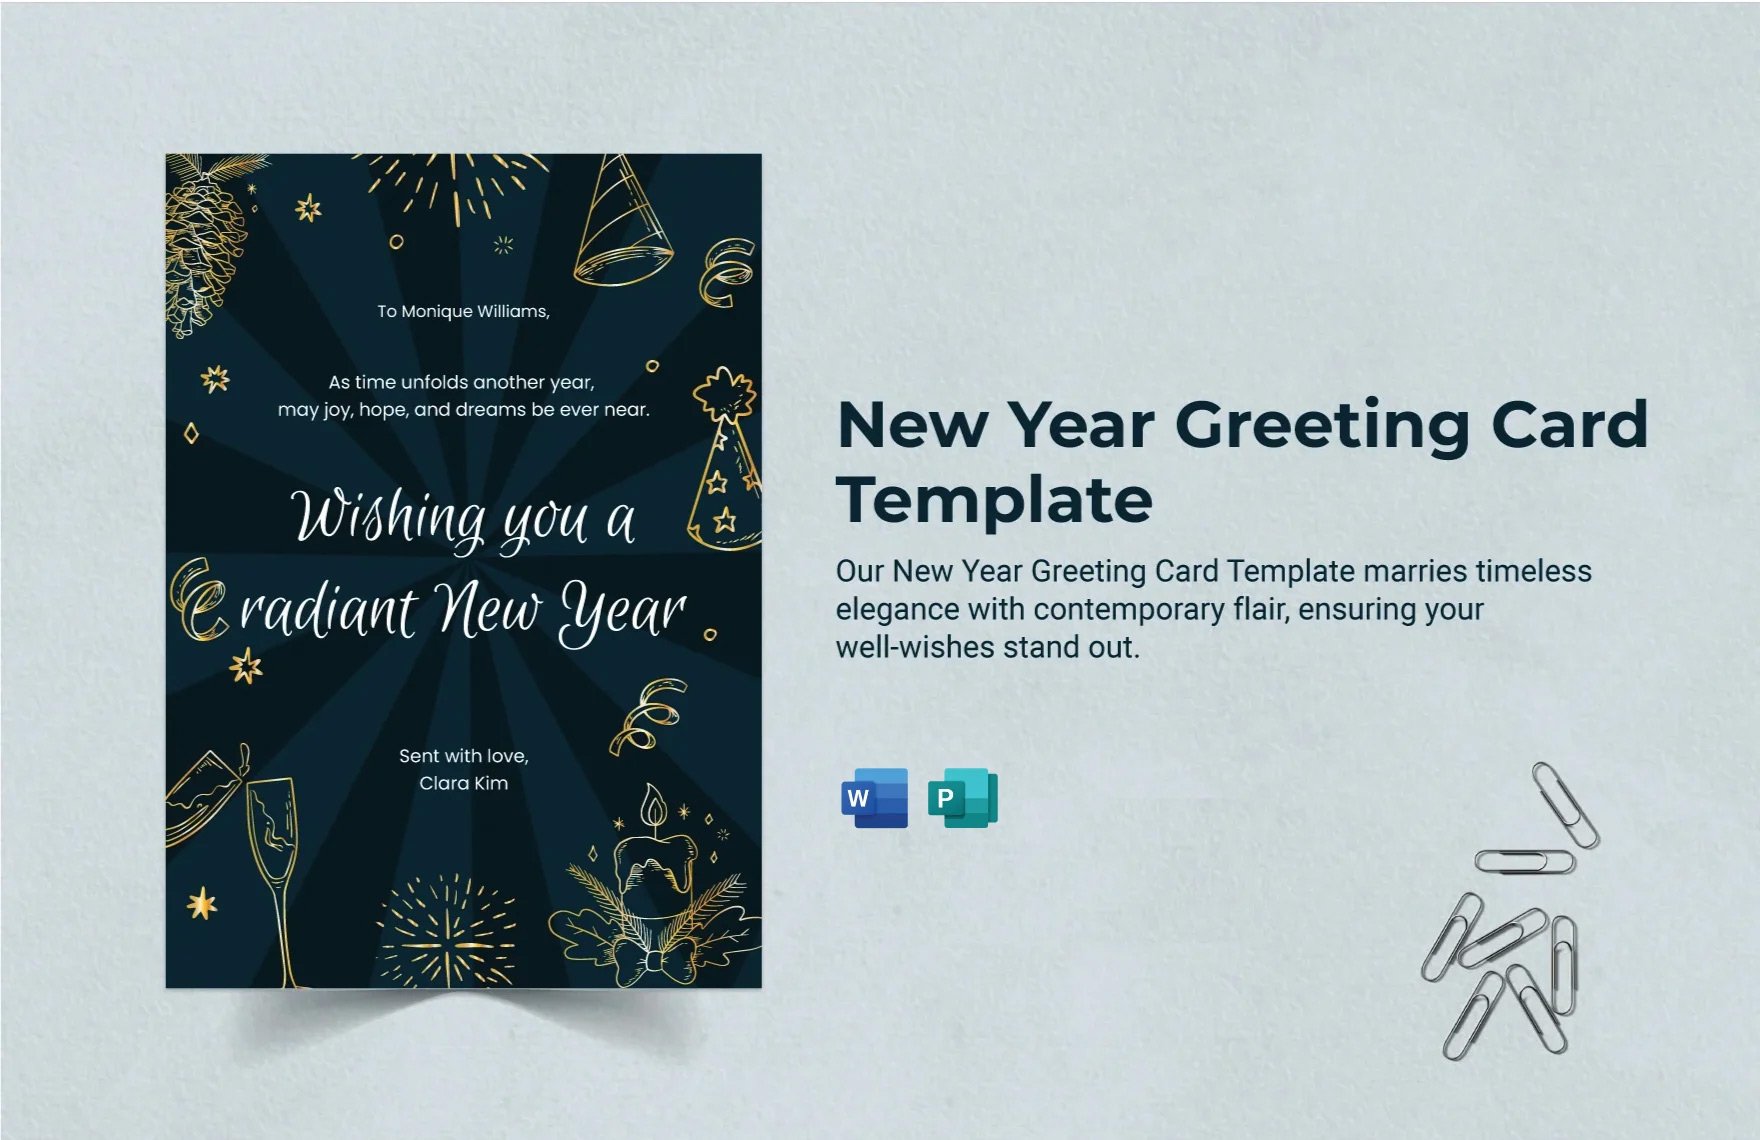 Free New Year Greeting Card Template in Word, Publisher